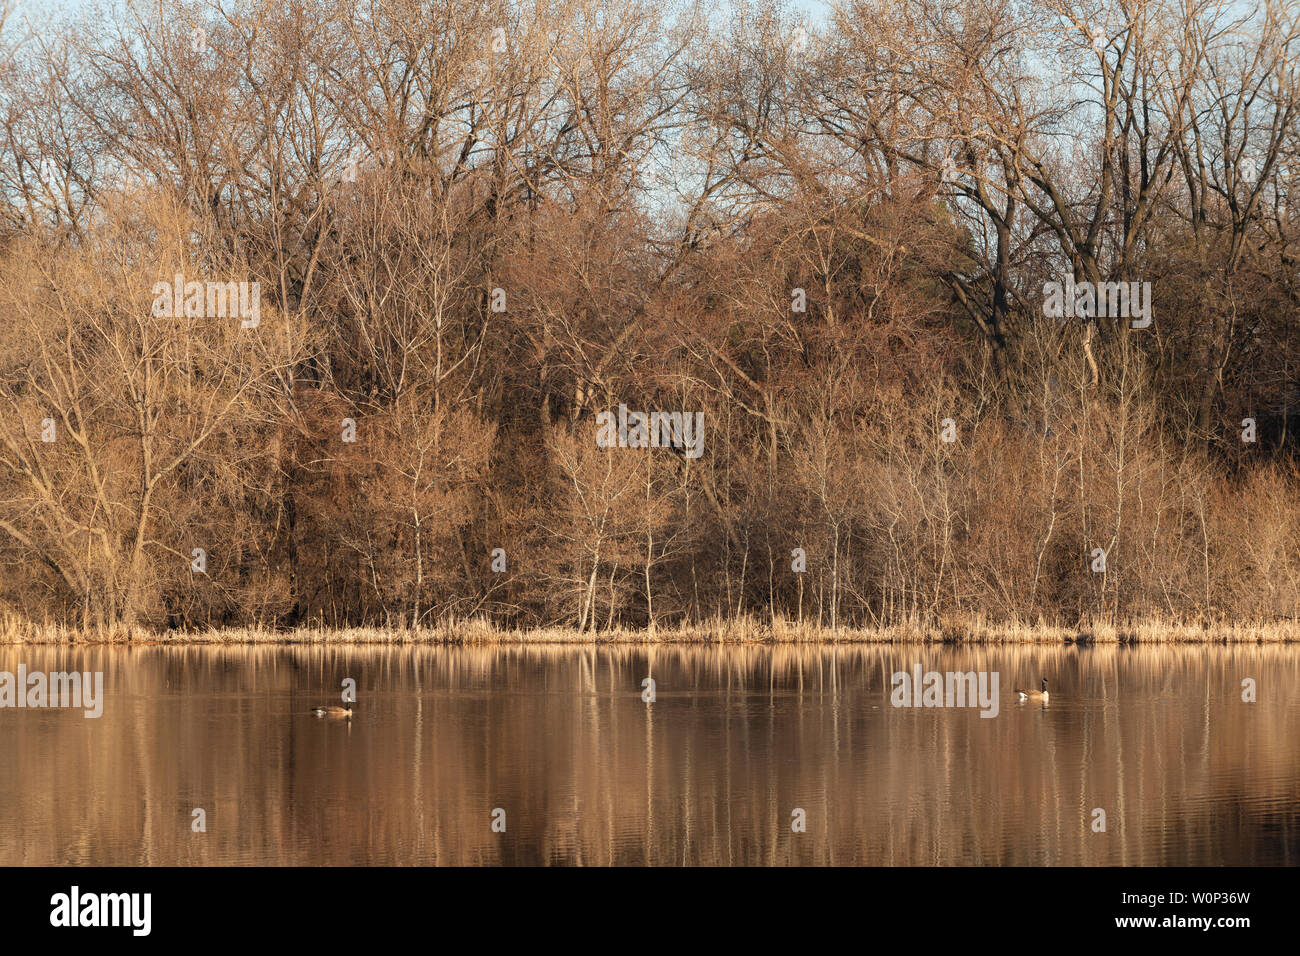 Pair of Canada geese (Branta canadensis) on Wood Lake, early Spring, Minnesota, USA, by Dominique Braud/Dembinsky Photo Assoc Stock Photo